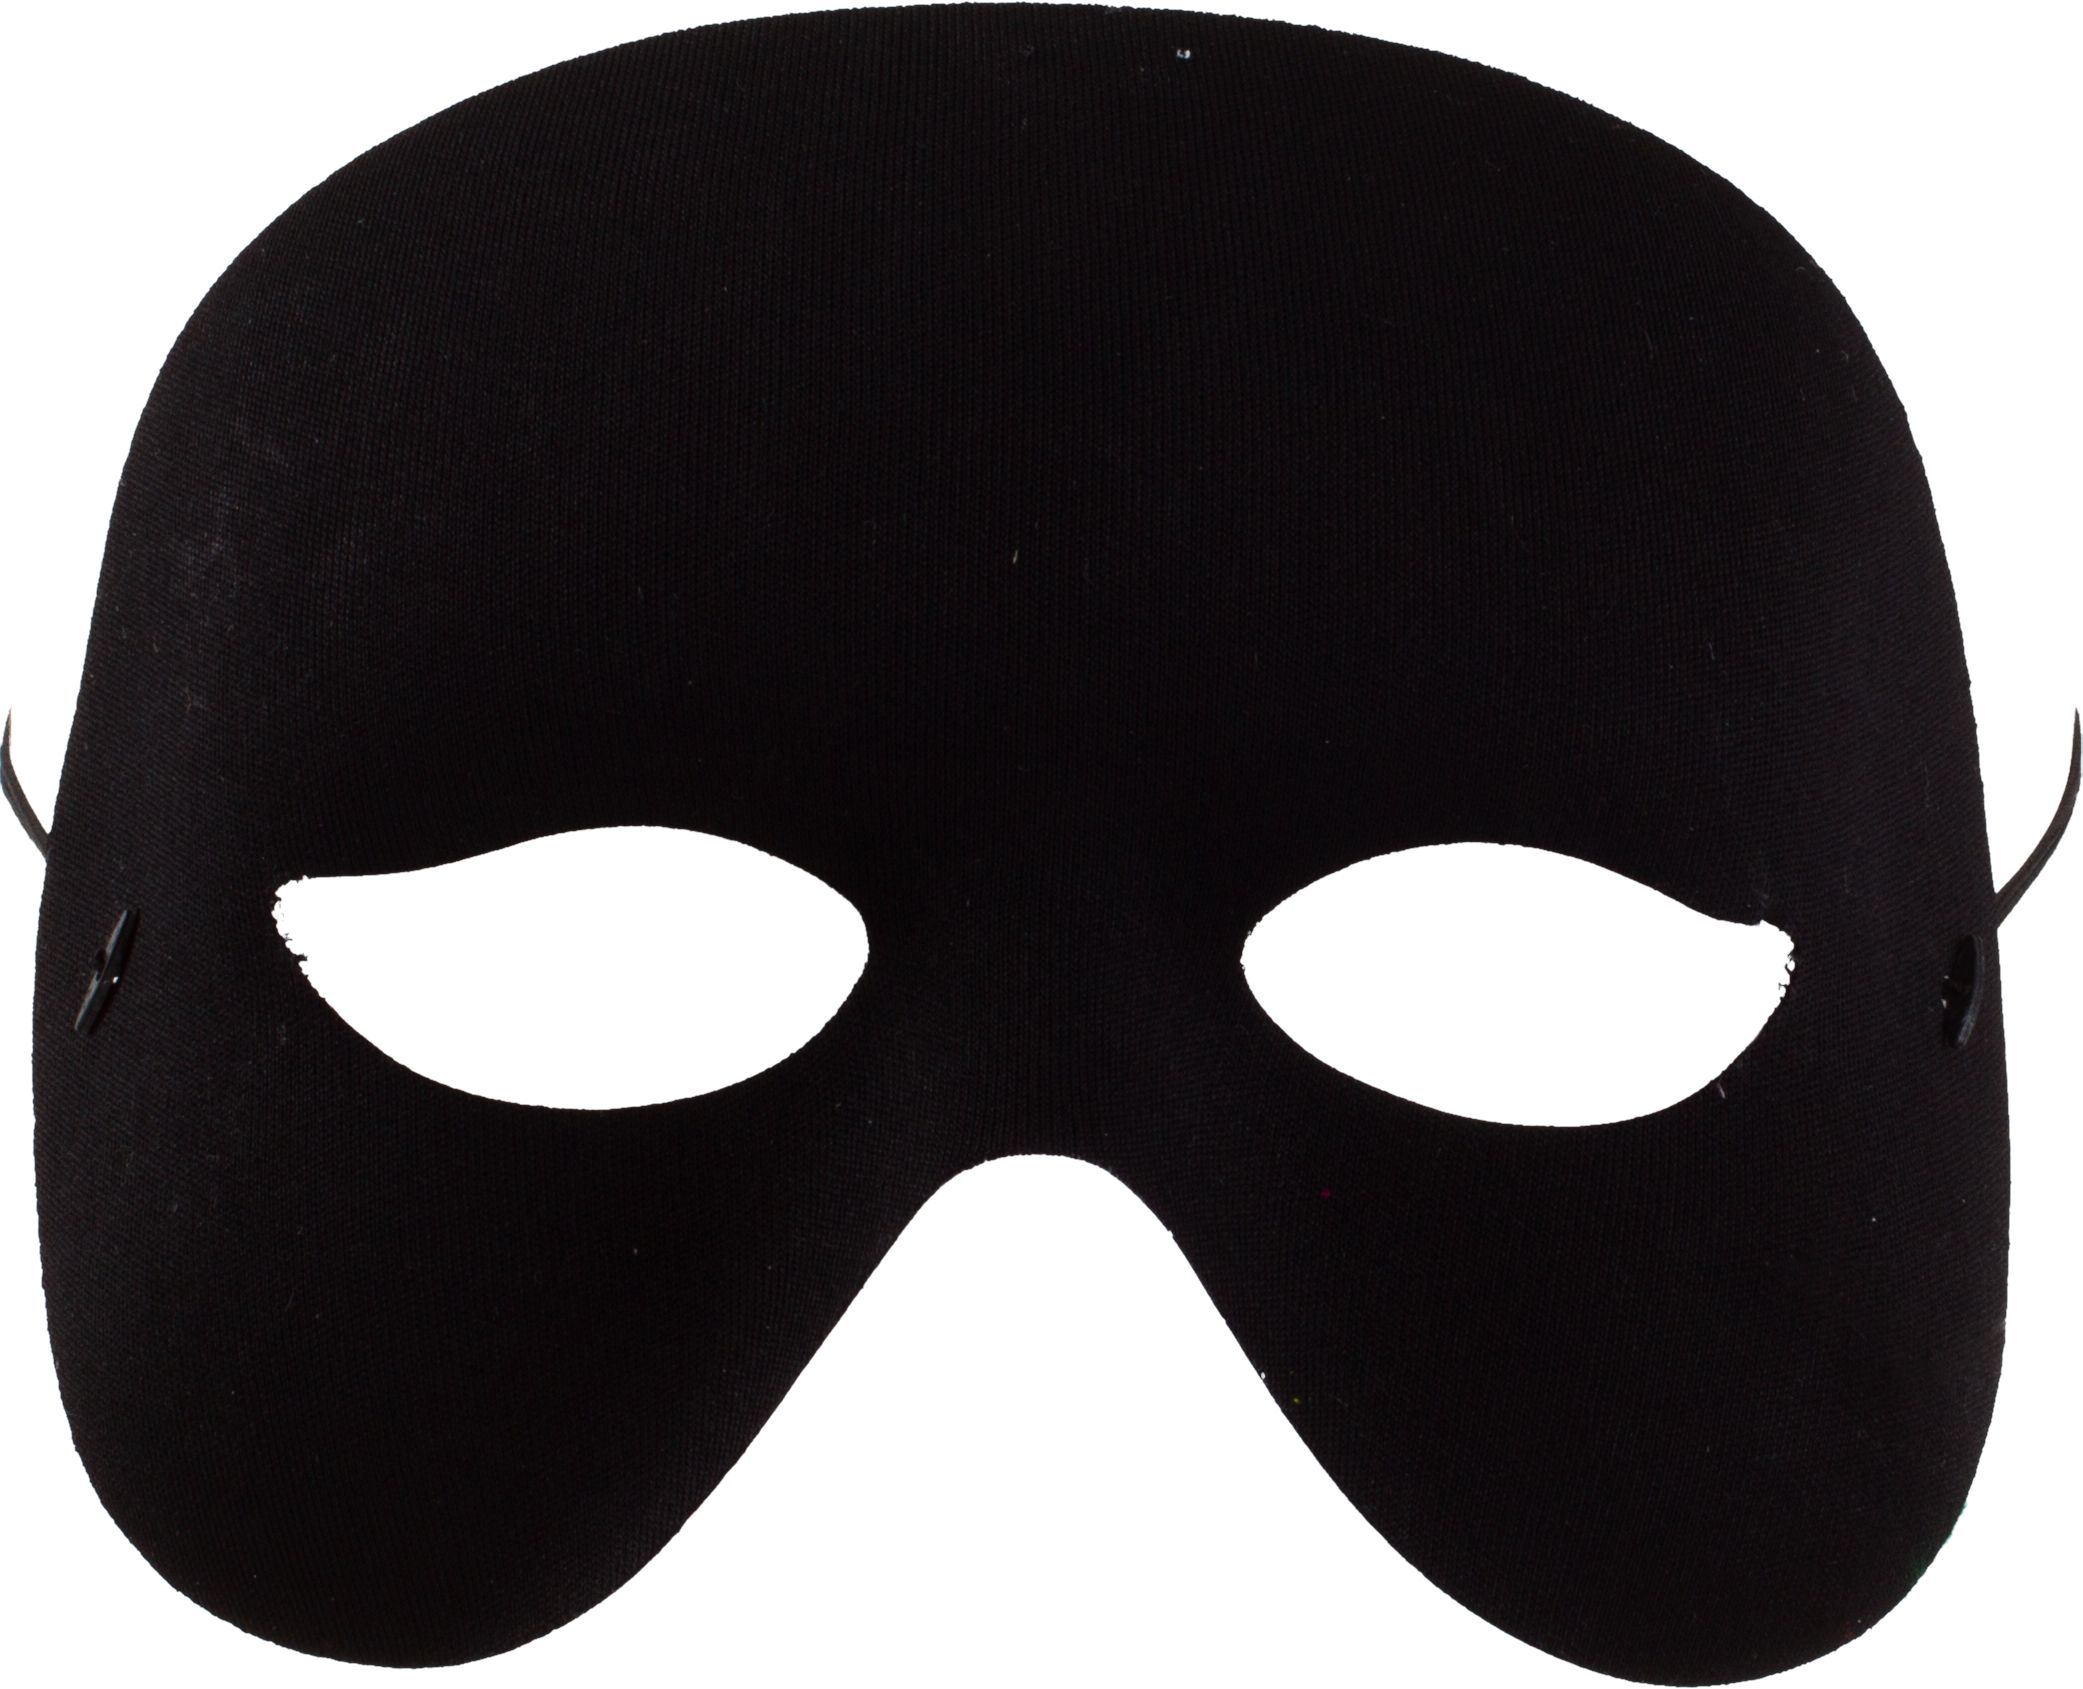 Domino Cocktail Eye Mask, Black, One Size, Wearable Costume Accessory for  Halloween